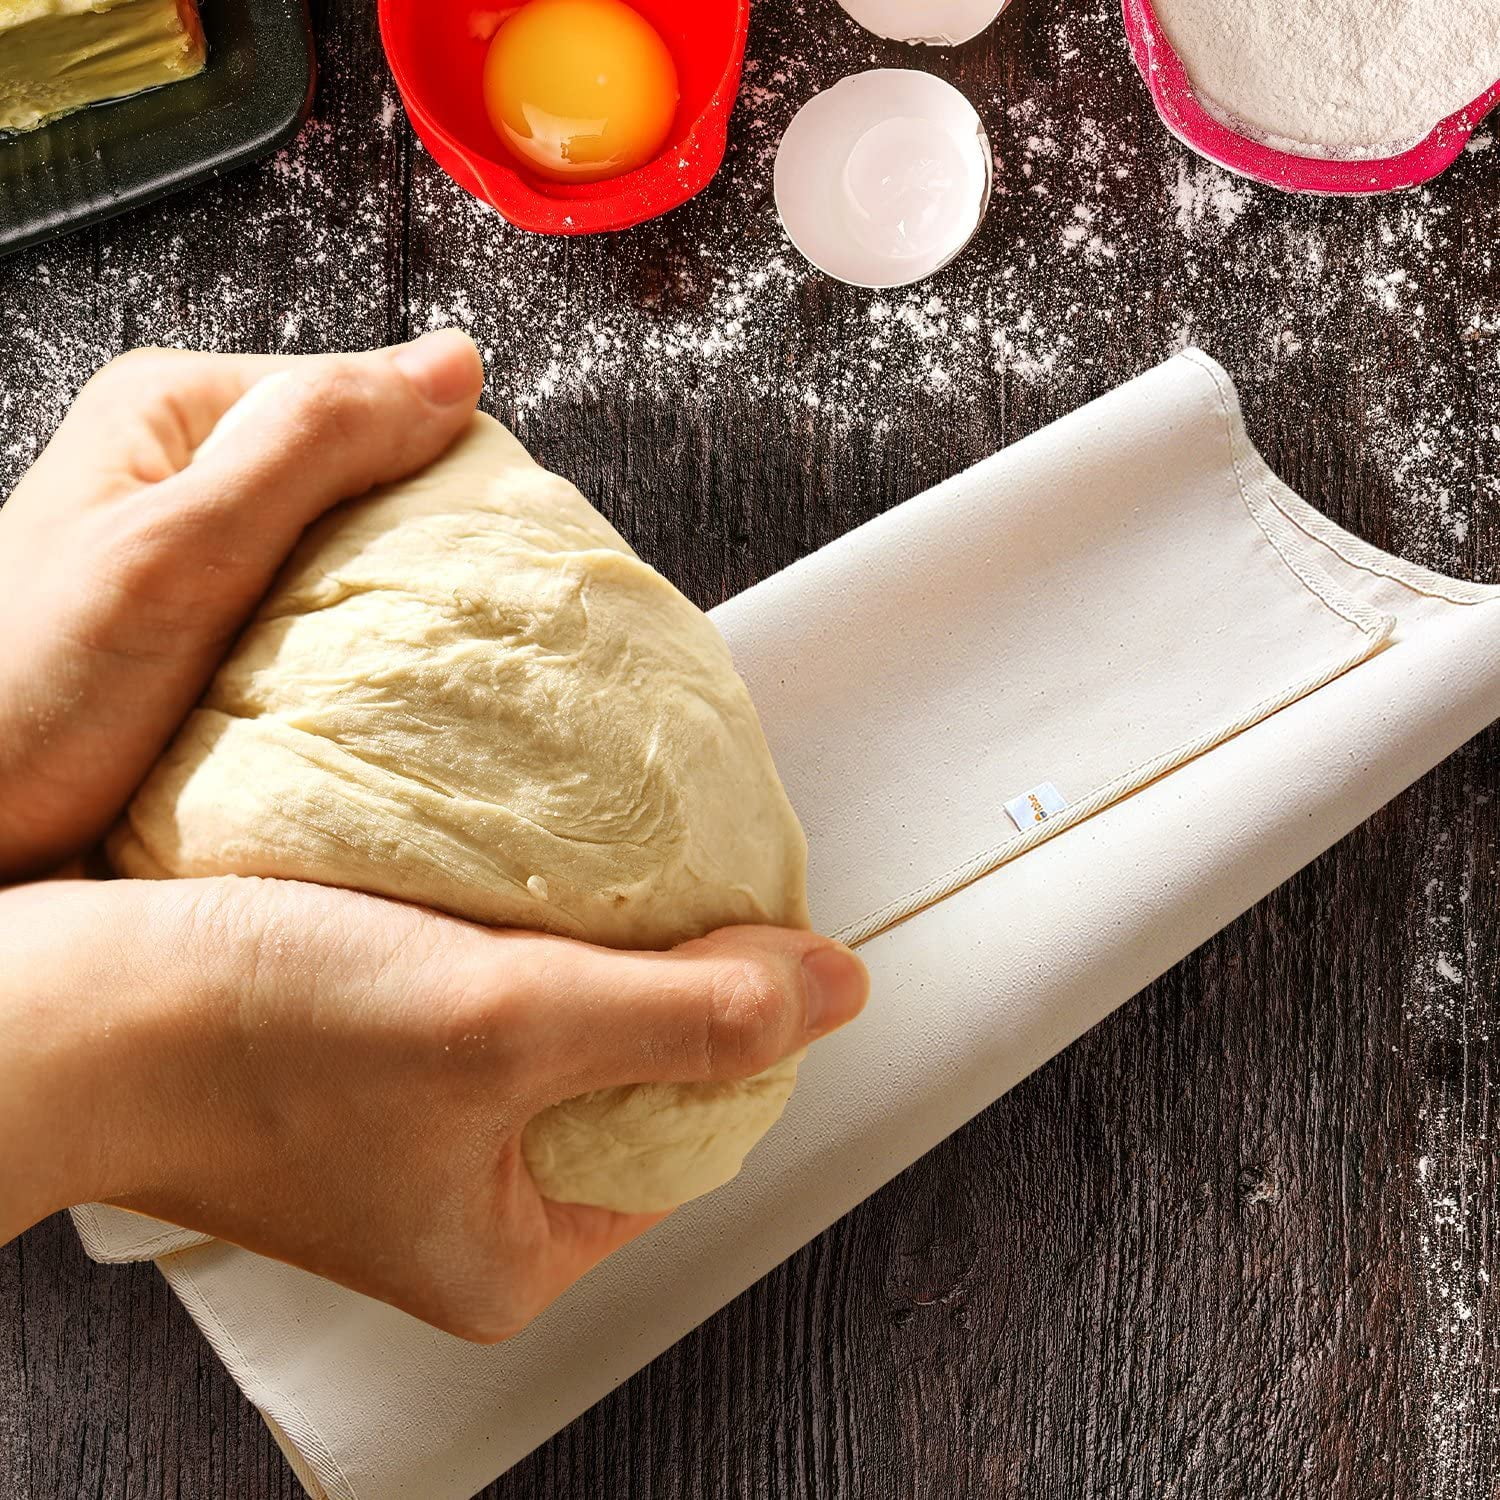 Professional Baguette Couche Baking Proofing Cloth CANDeal 2-Piece Large Bakers Couche 18x14.5 Rolling Dough Proofer Made of 100% Flax Linen Bread Cloche 